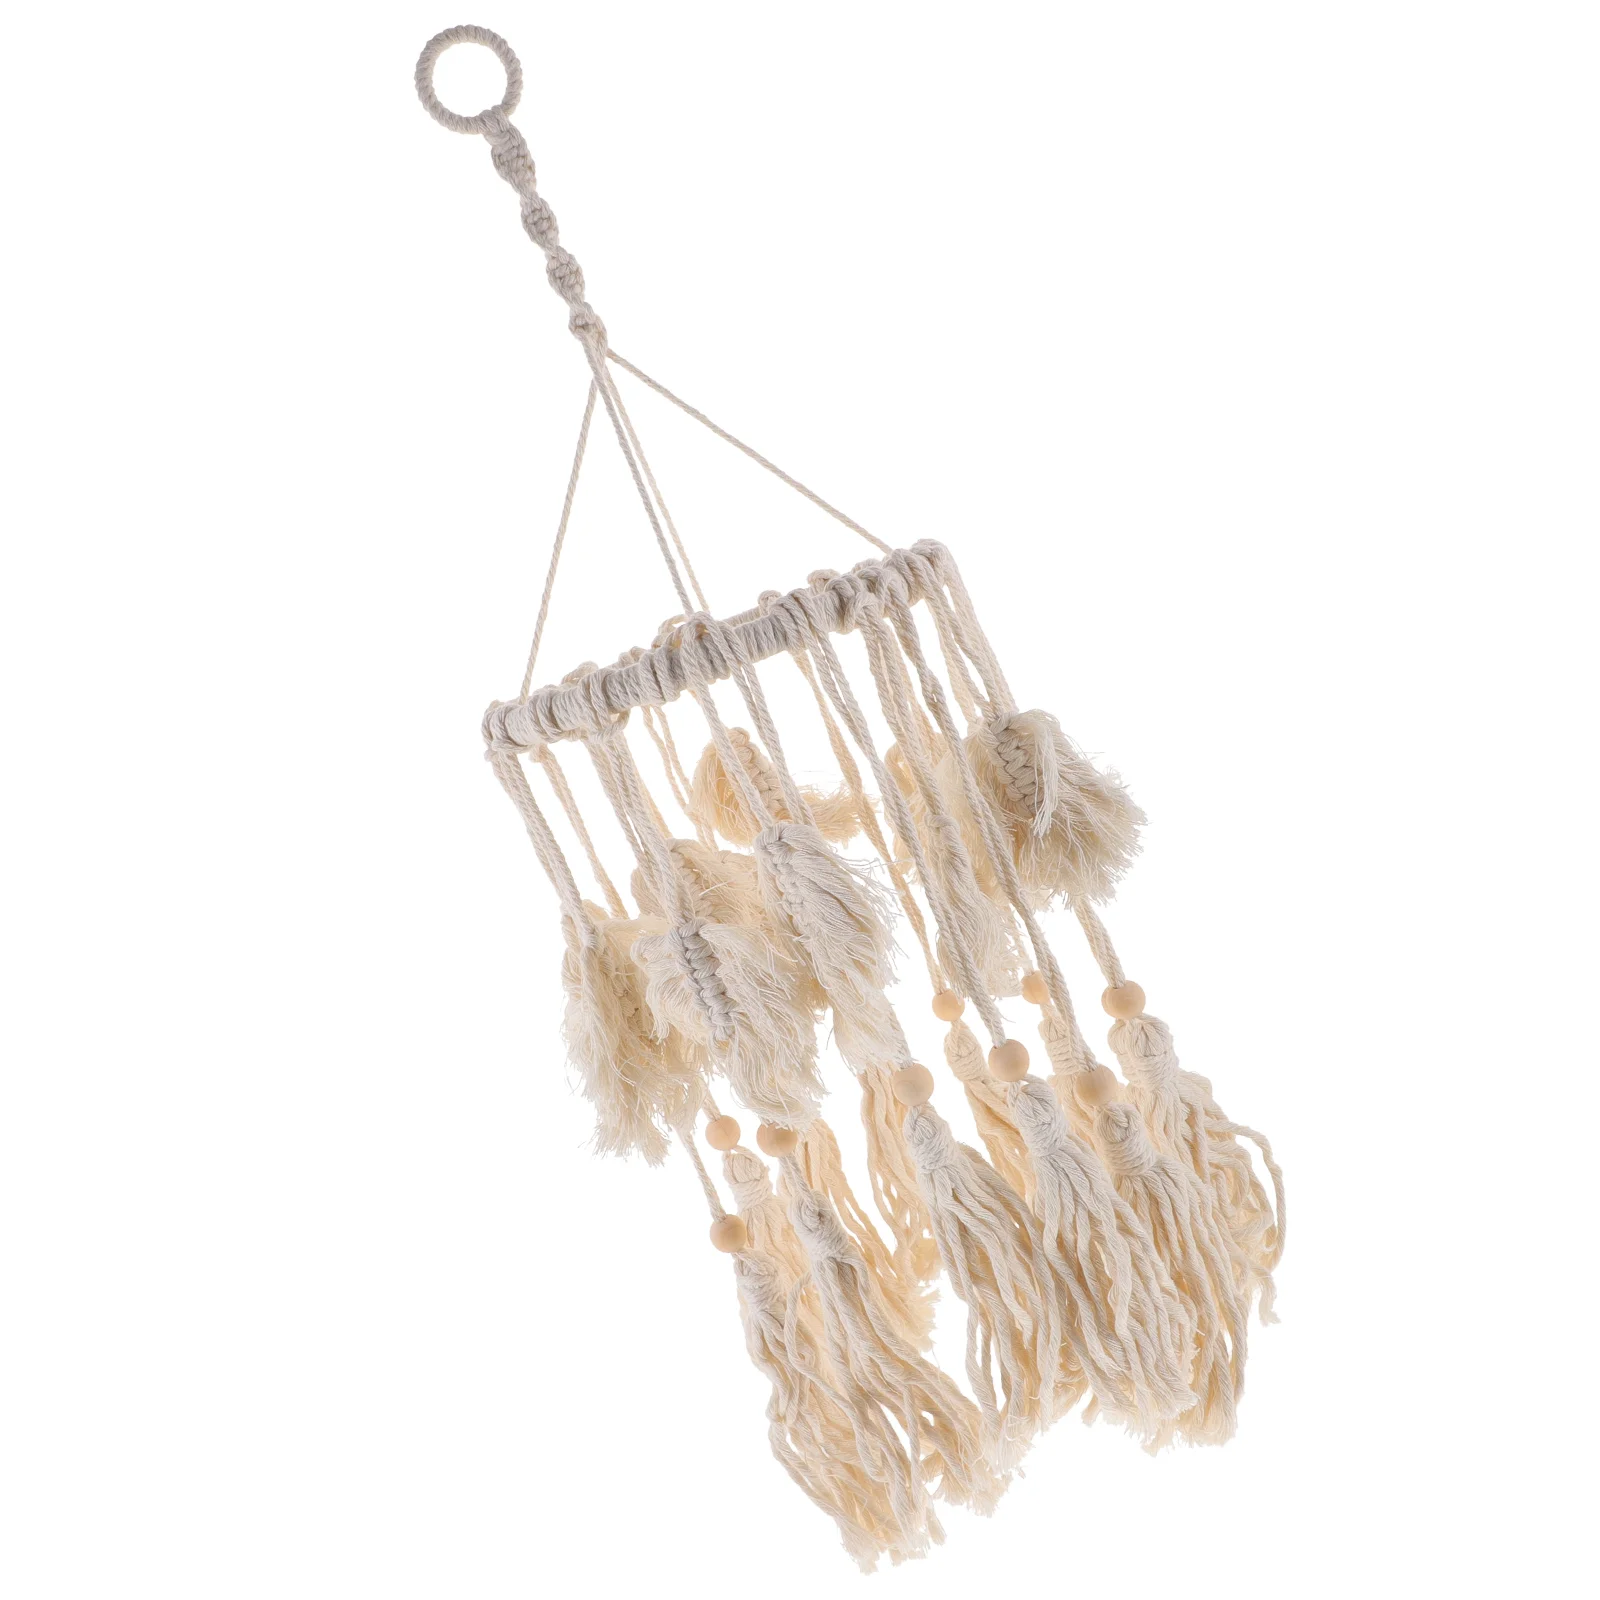 

Fringed Cotton Rope Lampshade Ceiling Cover Bohemian Shades Pendant Decorative Macrame Light Covers Household